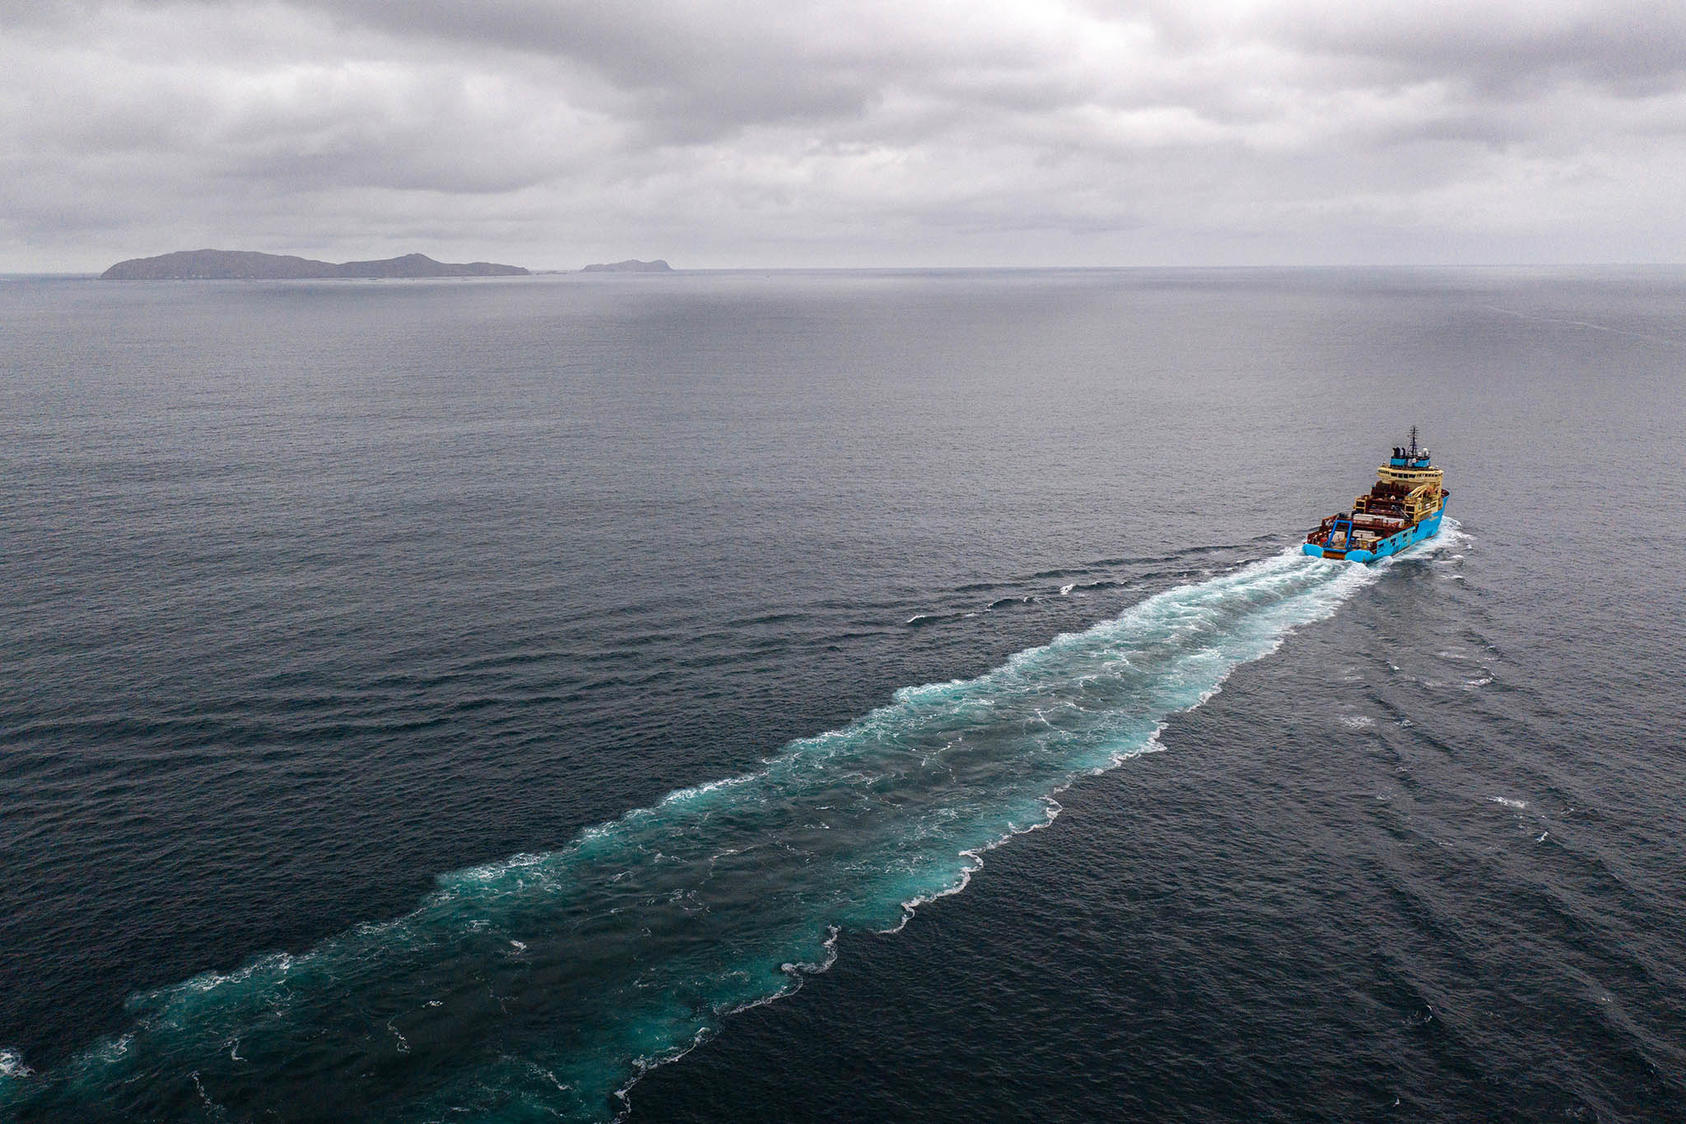 A ship carries seabed samples from the remote Clarion-Clipperton Zone of the Pacific Ocean, about 1,500 miles southwest of San Diego. June 7, 2021. (Tamir Kalifa/The New York Times)